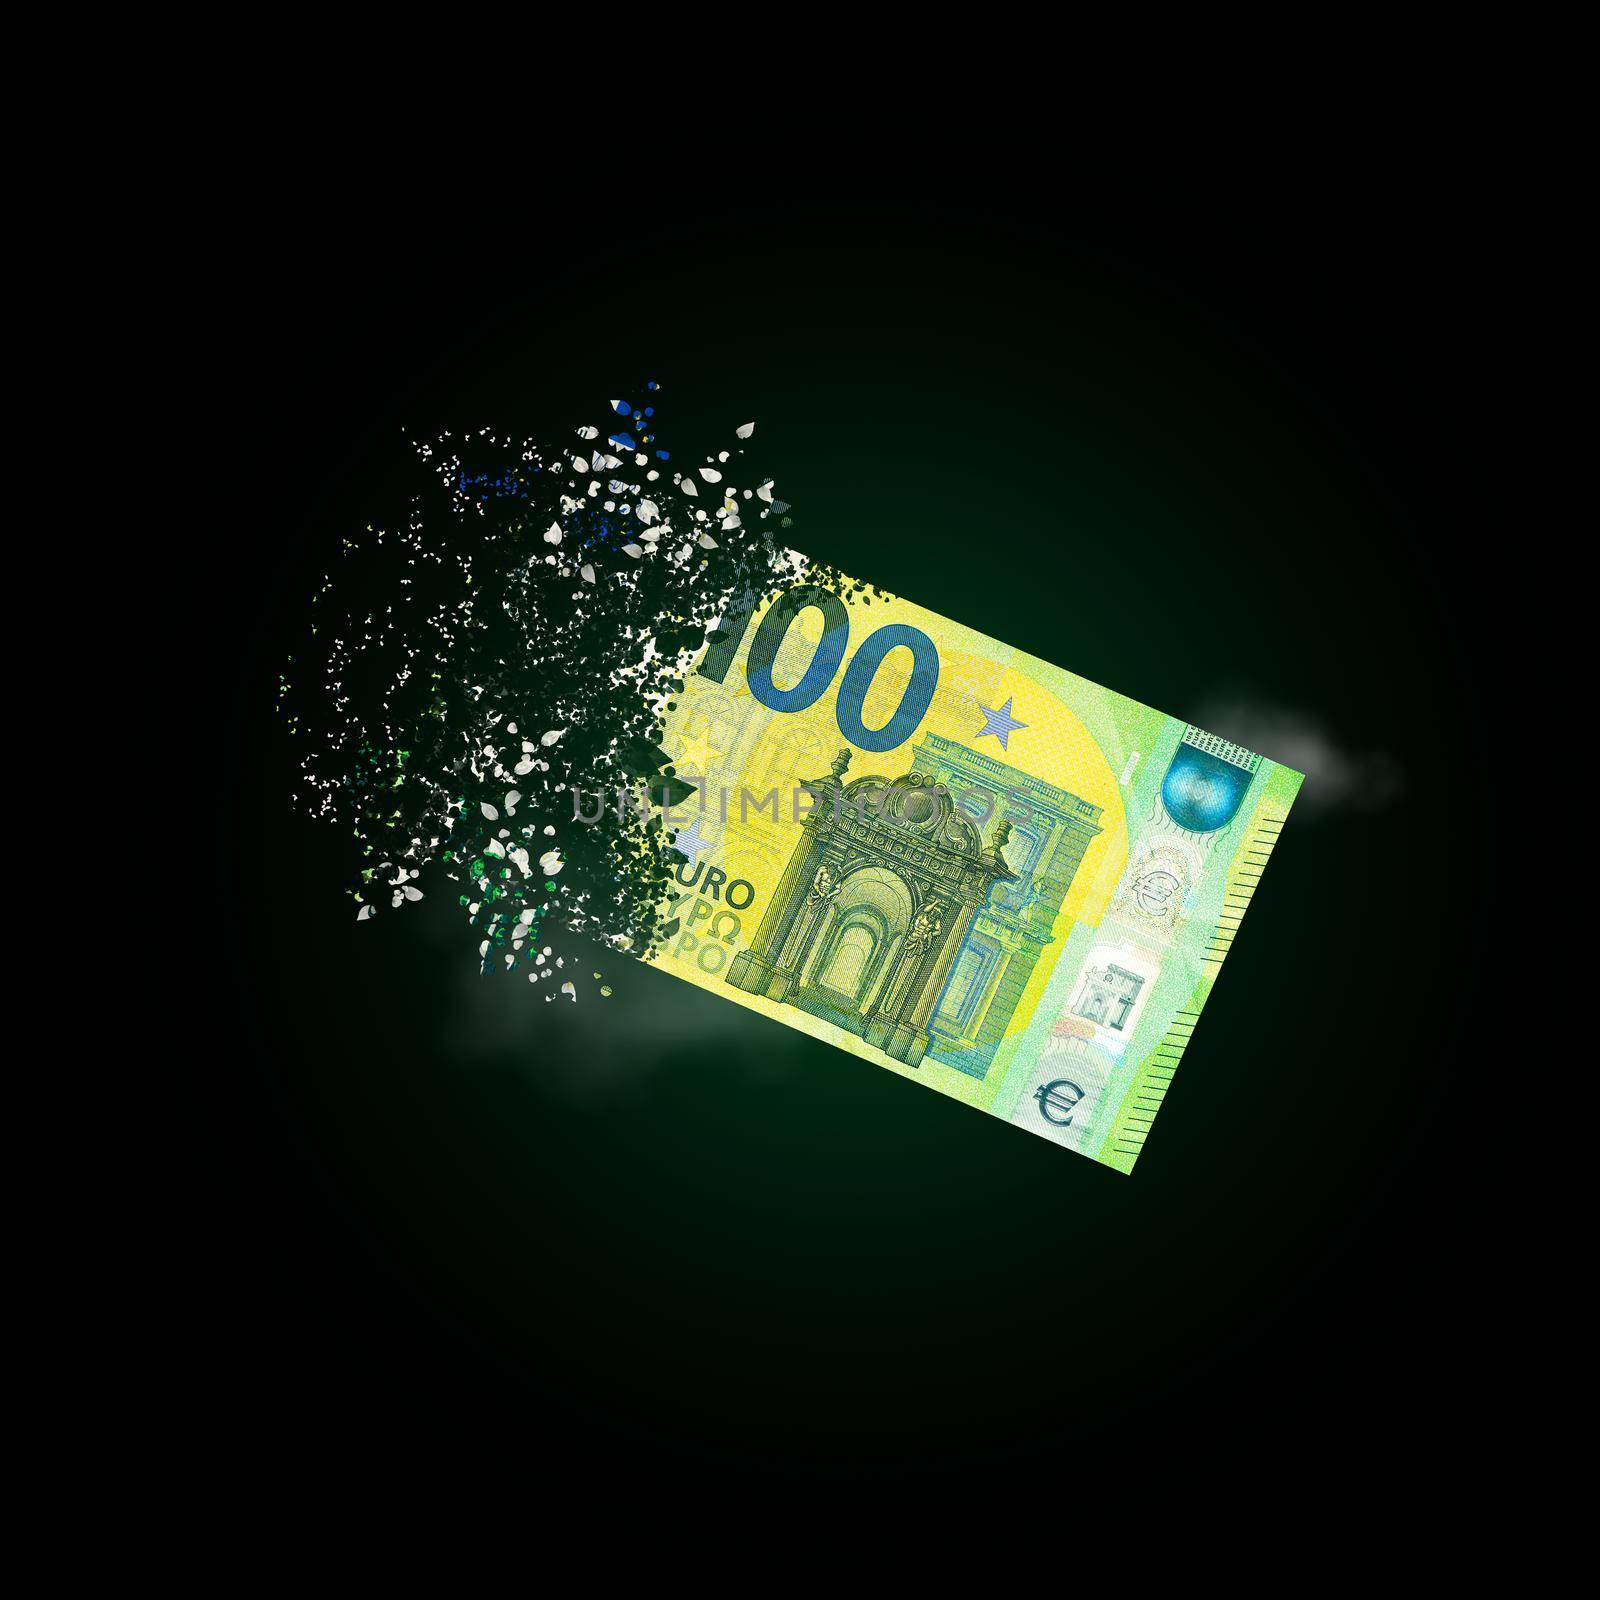 100 euro bills scattered in the air. money inflation concept. the disappearance of banknotes by PhotoTime